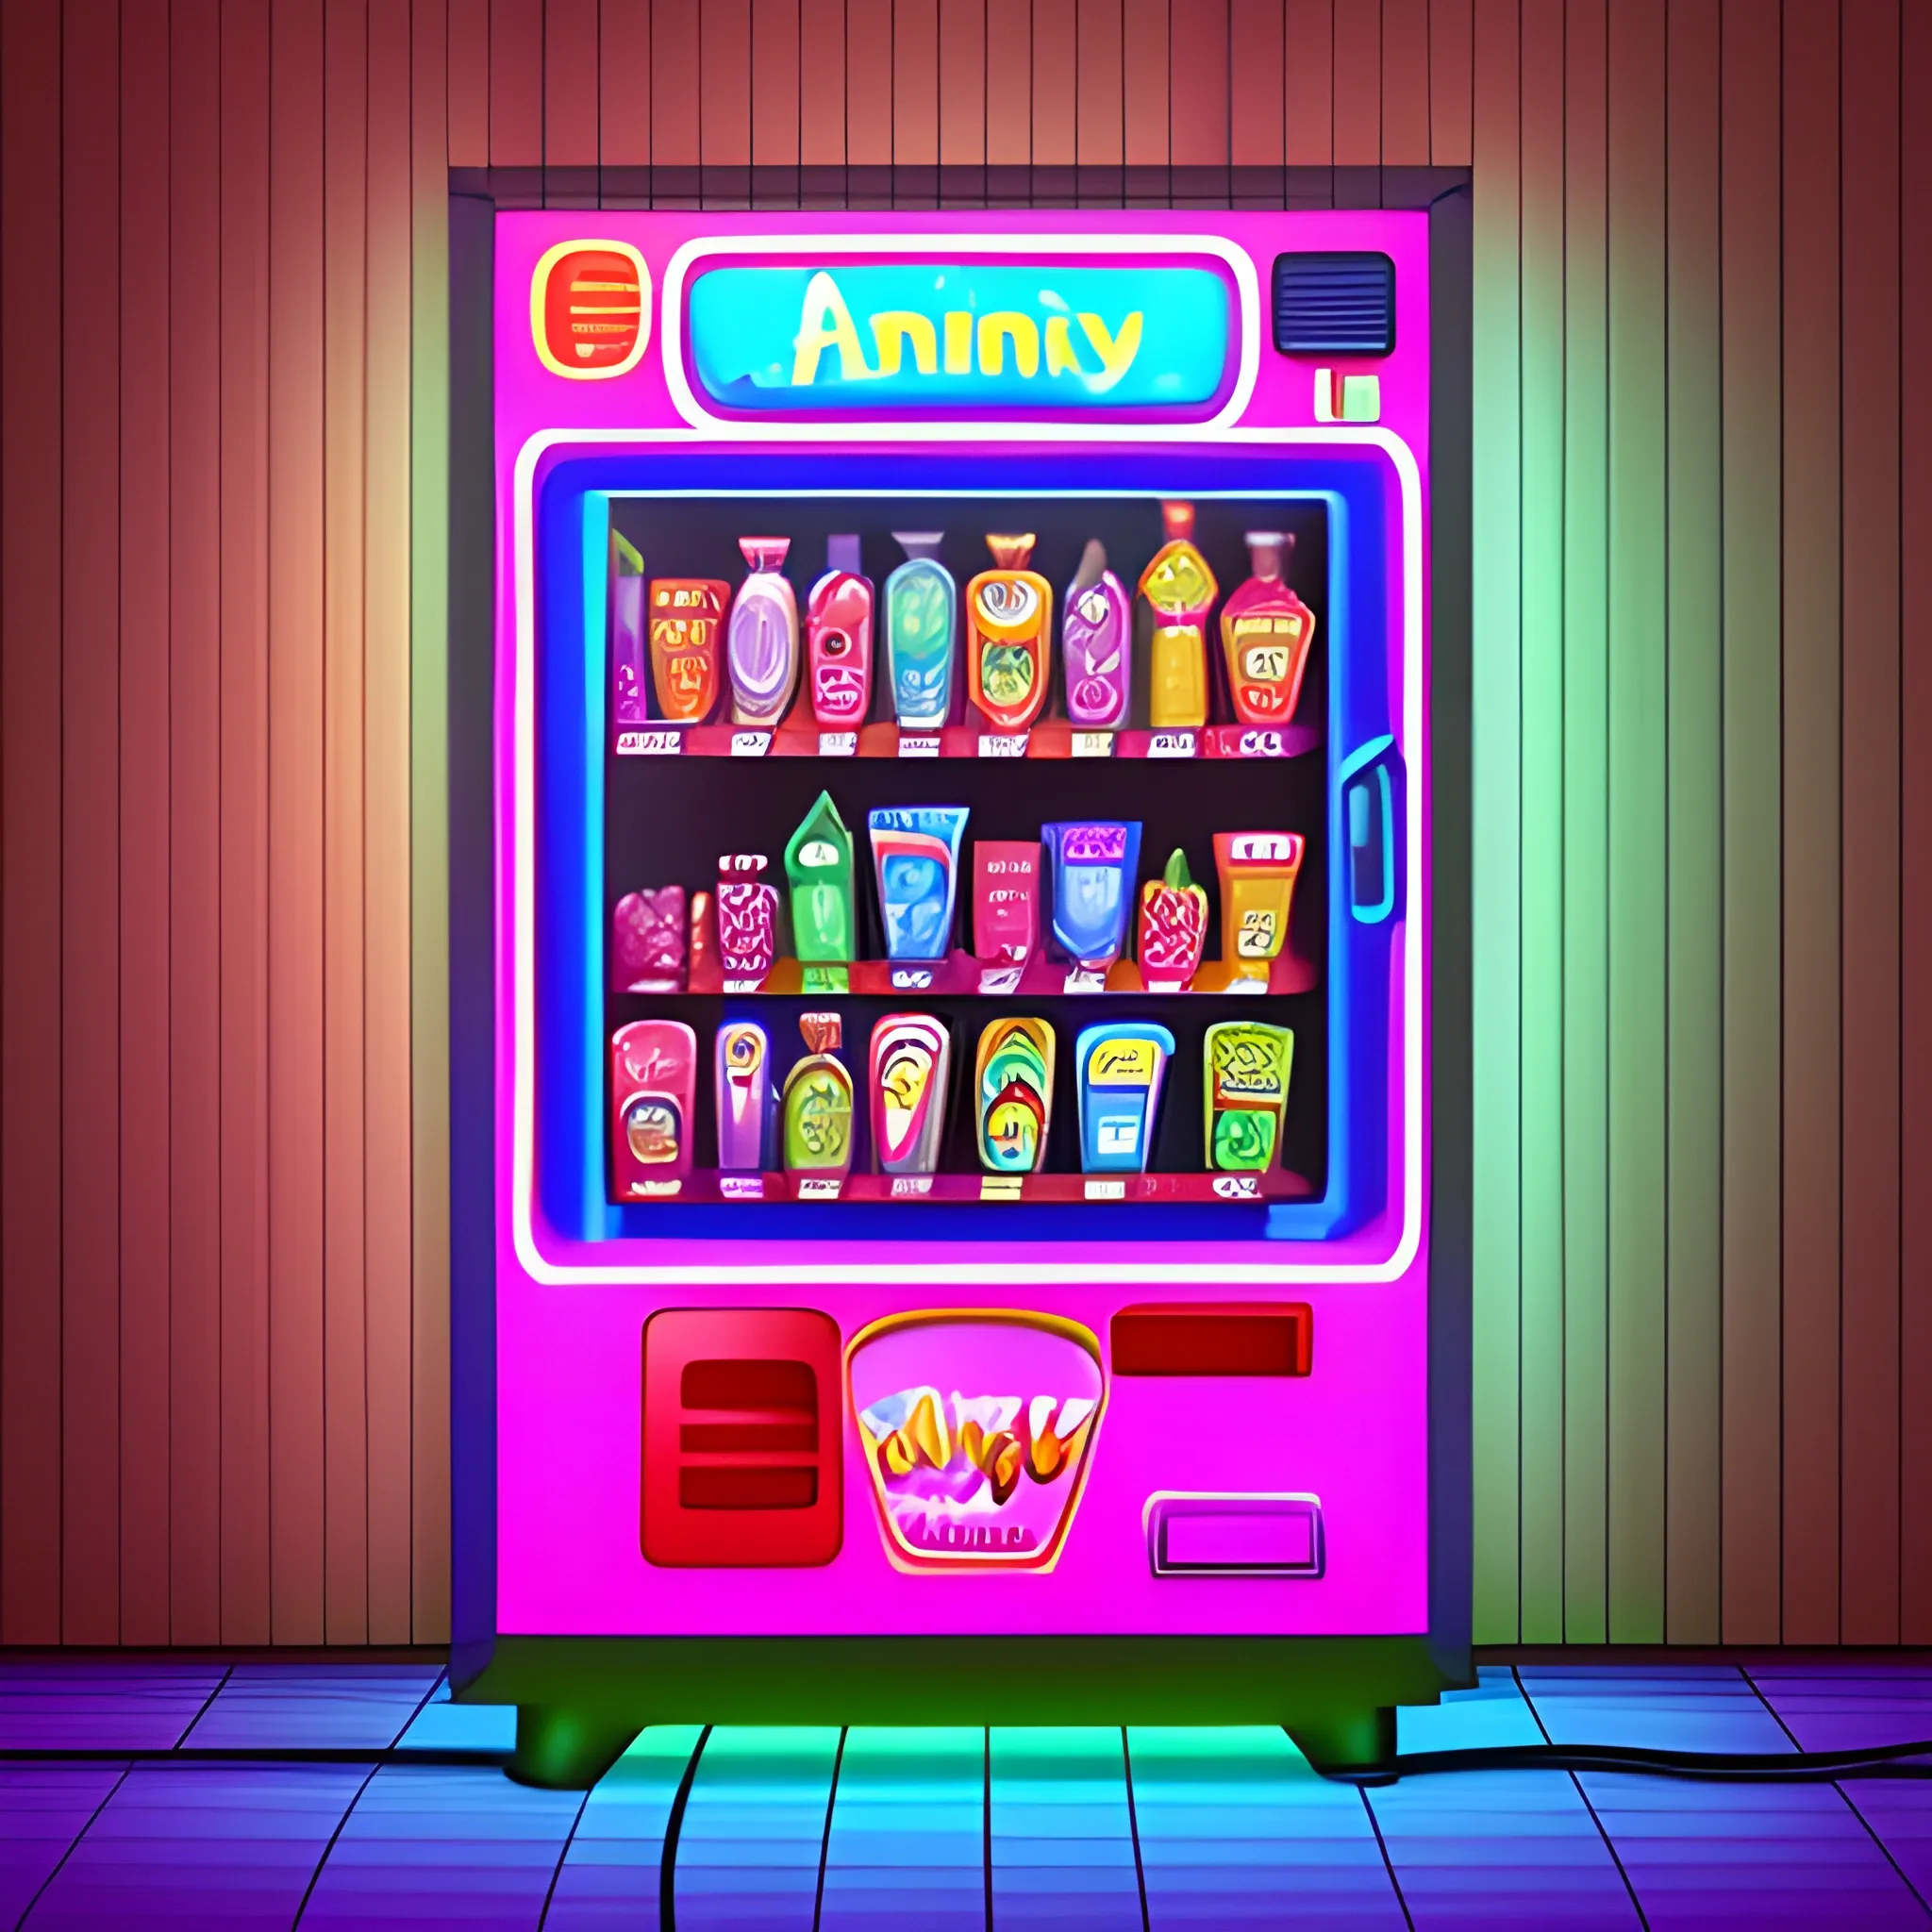 vending machine with candy, drinks, toys in a digital drawing style with neon lights, camera at an angle, wooden wall background and a window on the side.